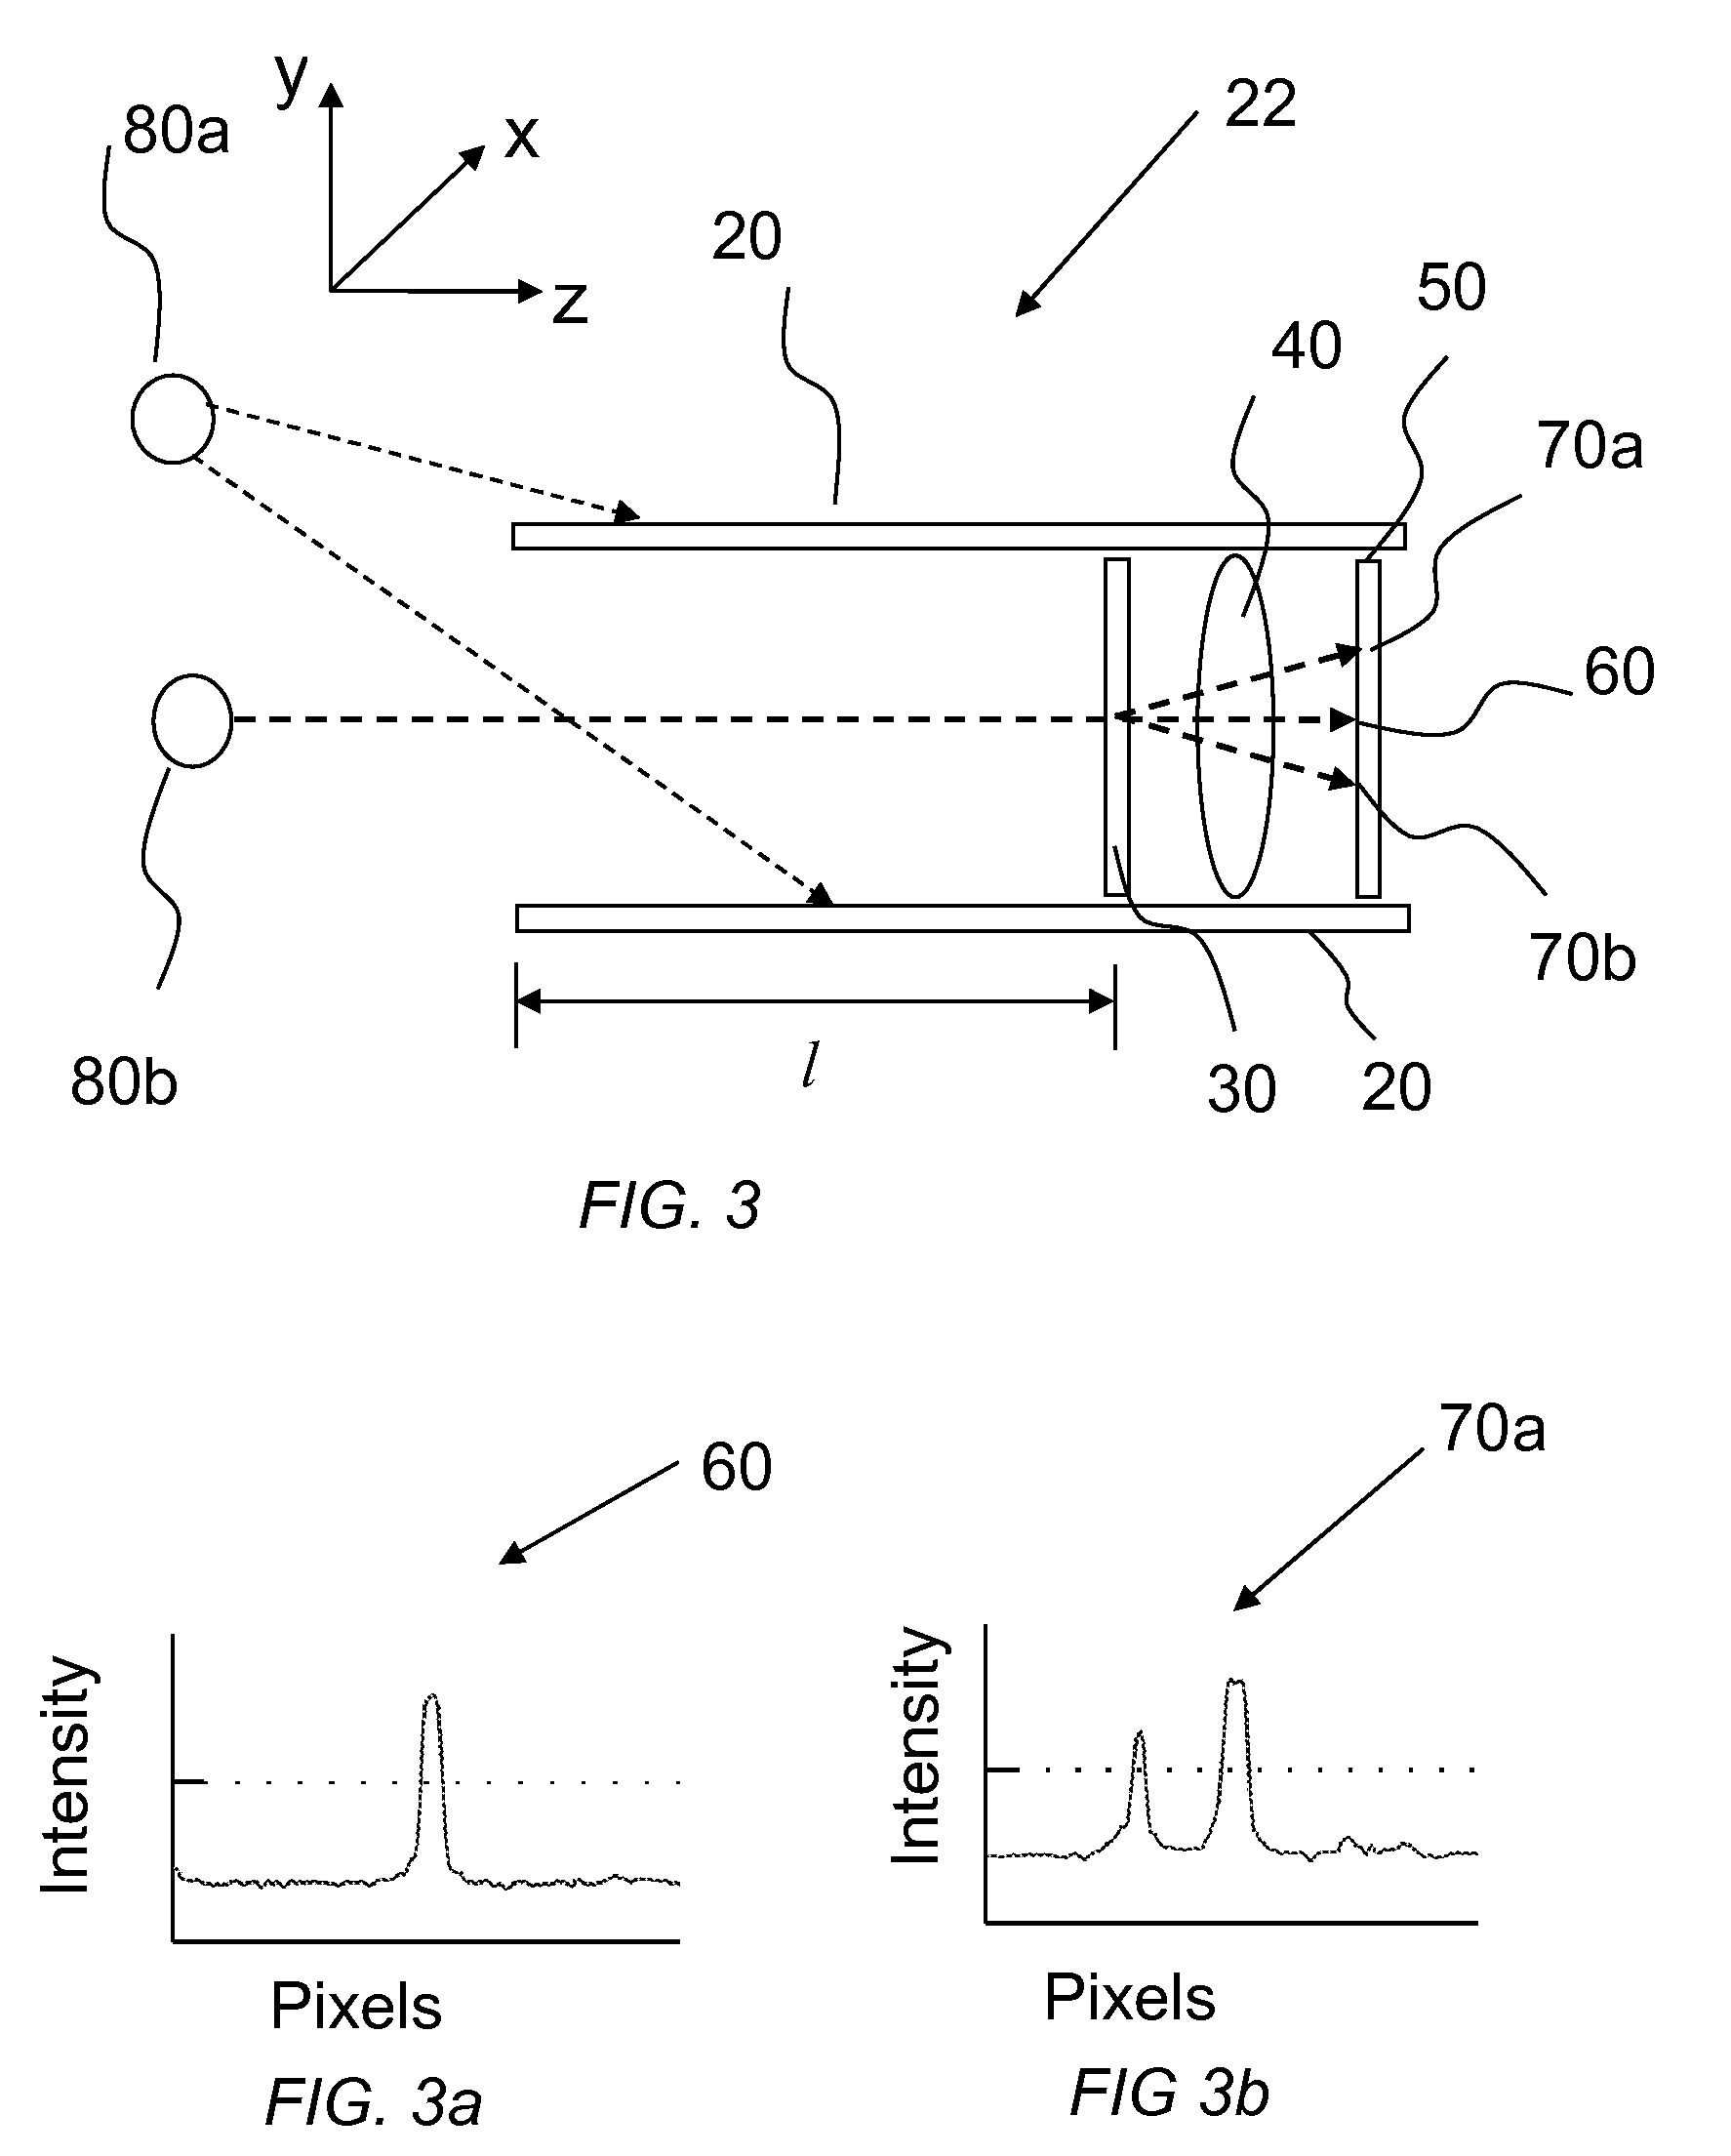 Detection and classification of light sources using a diffraction grating